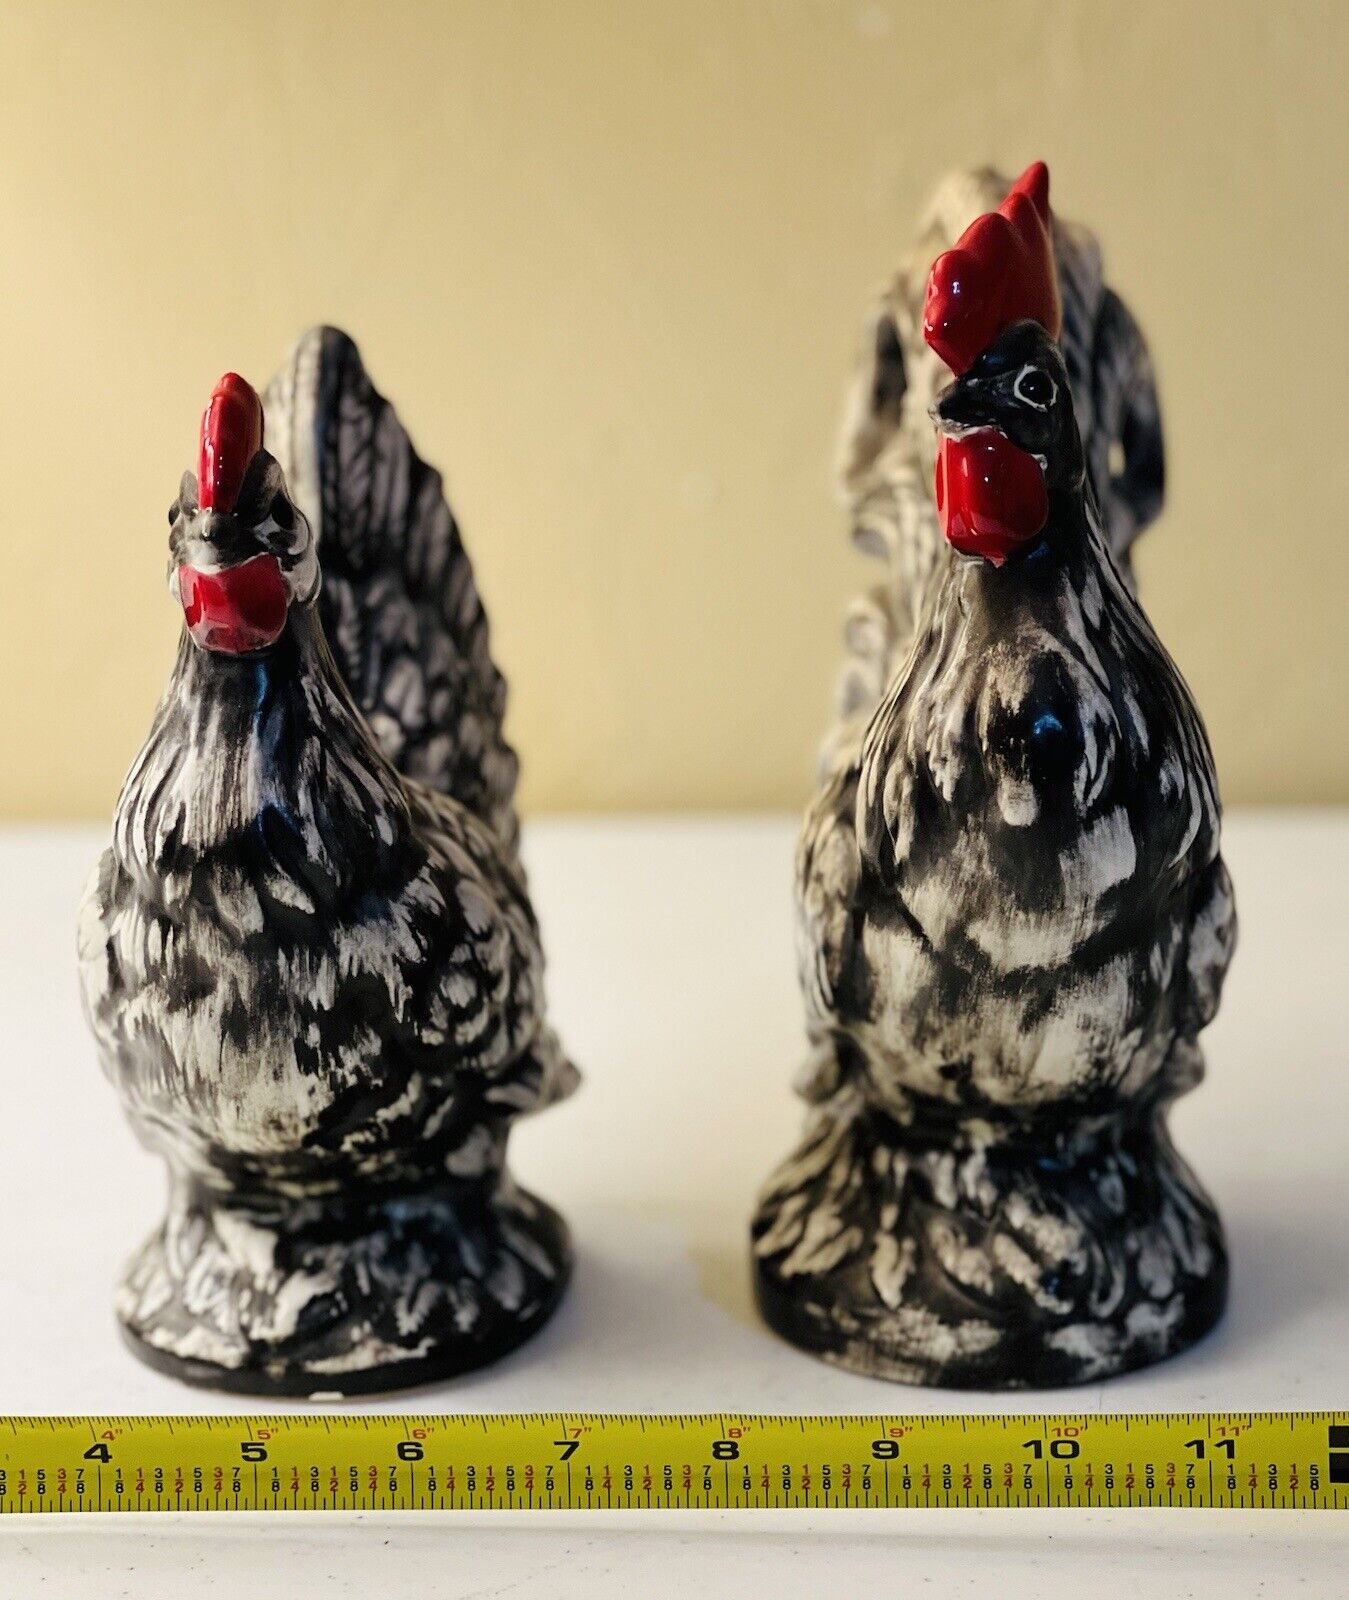 PRETTY PAIR OF CERAMIC ROOSTER AND HEN FIGURINE